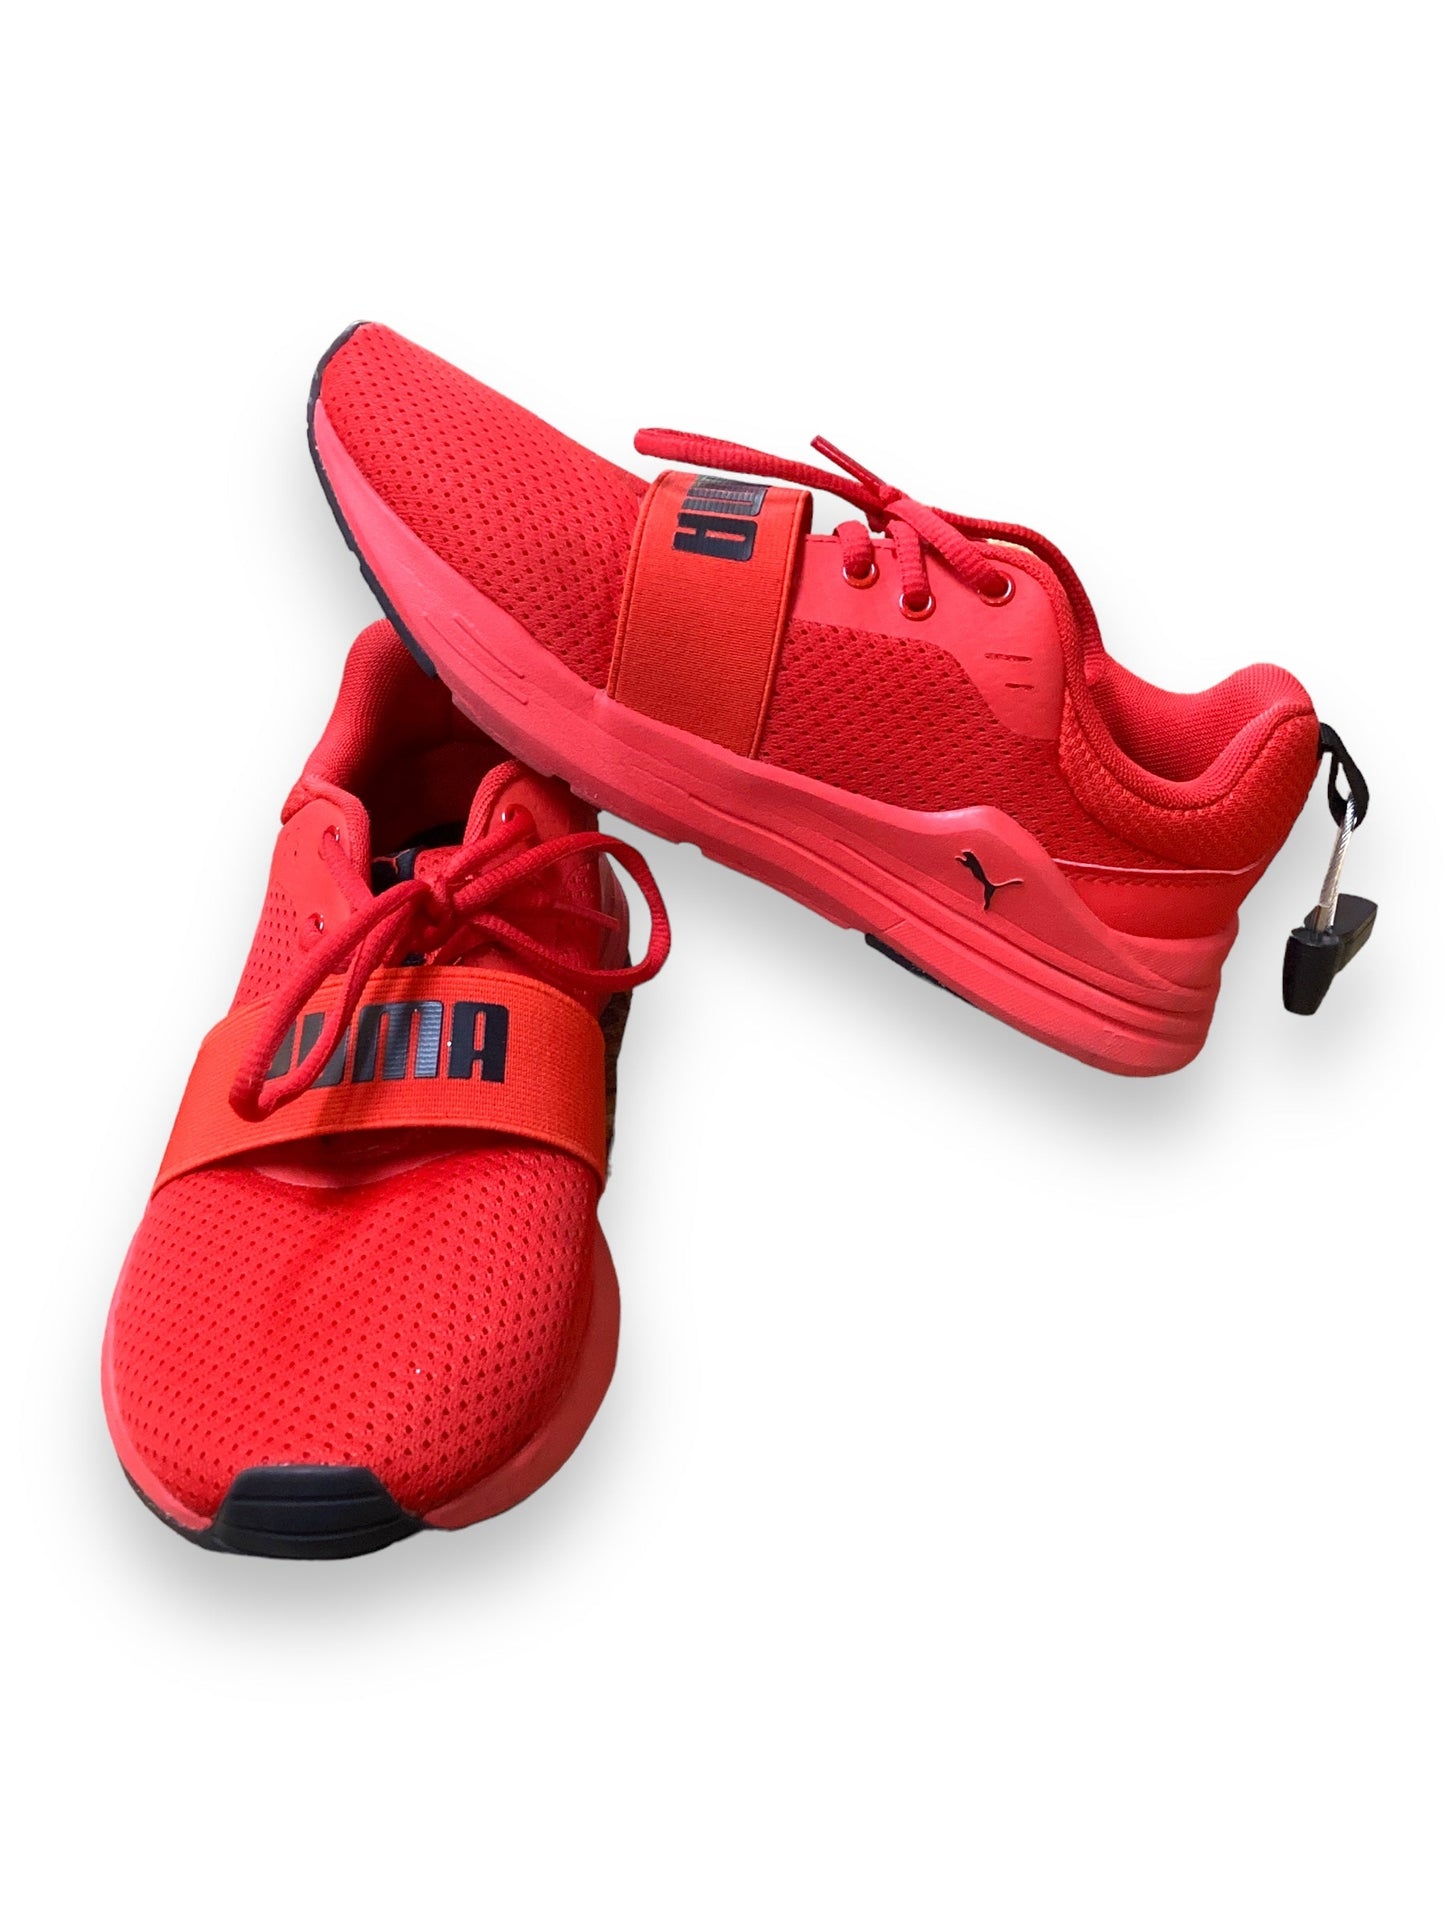 Red Shoes Sneakers Puma, Size 6